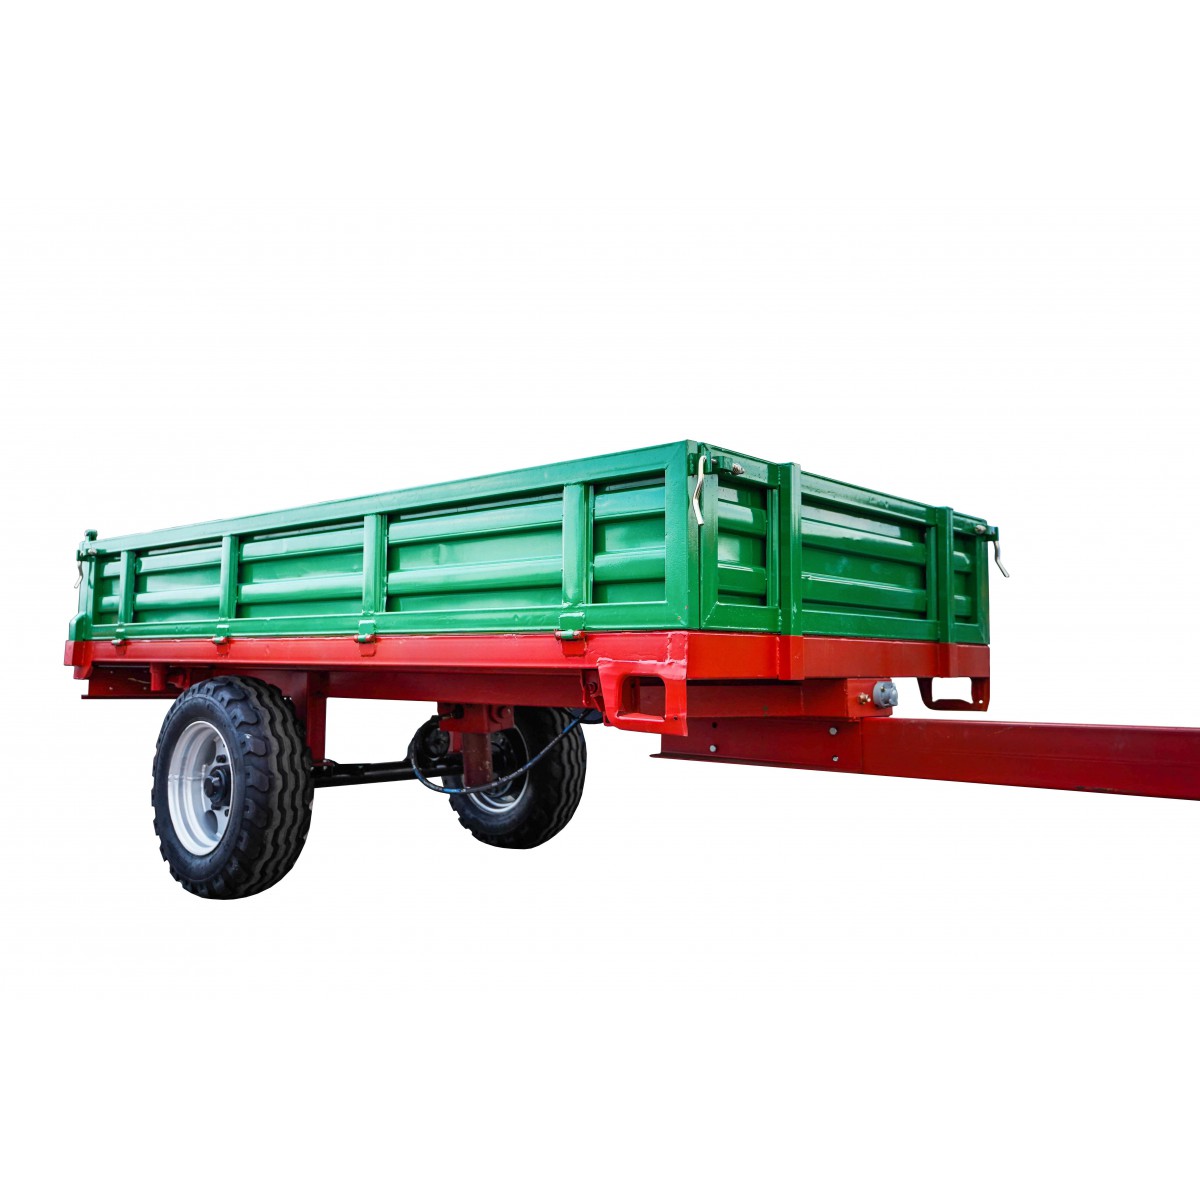 Single-axle agricultural trailer 3T (310 x 160 x 40 cm) with 4FARMER tipper